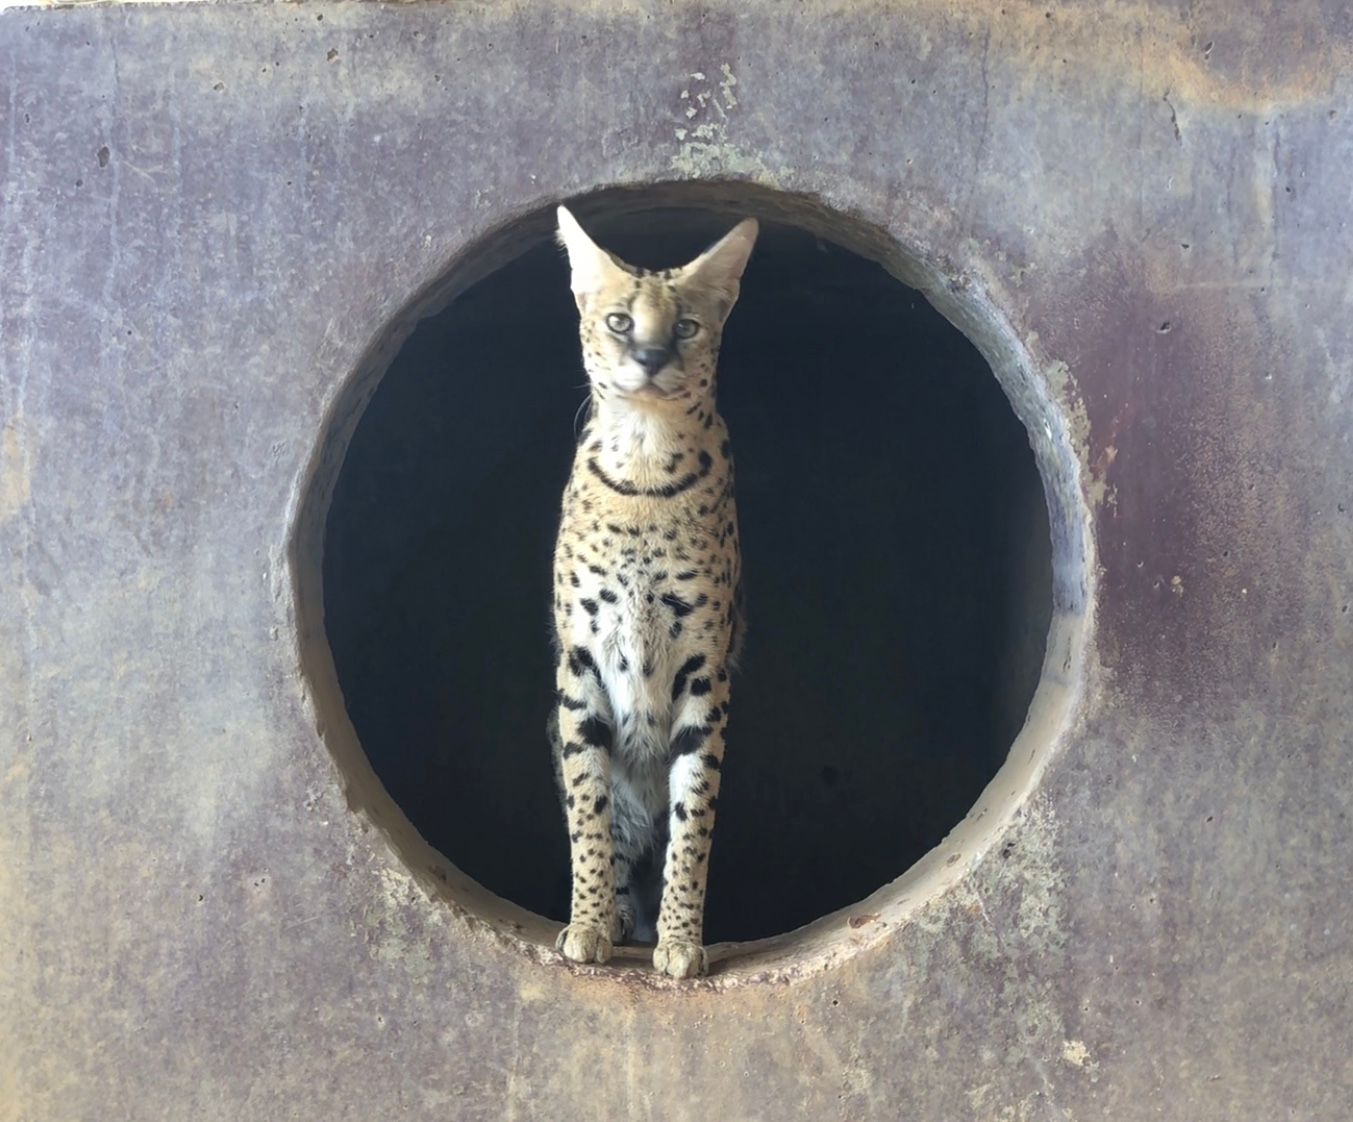 Meet Kevin the Serval!